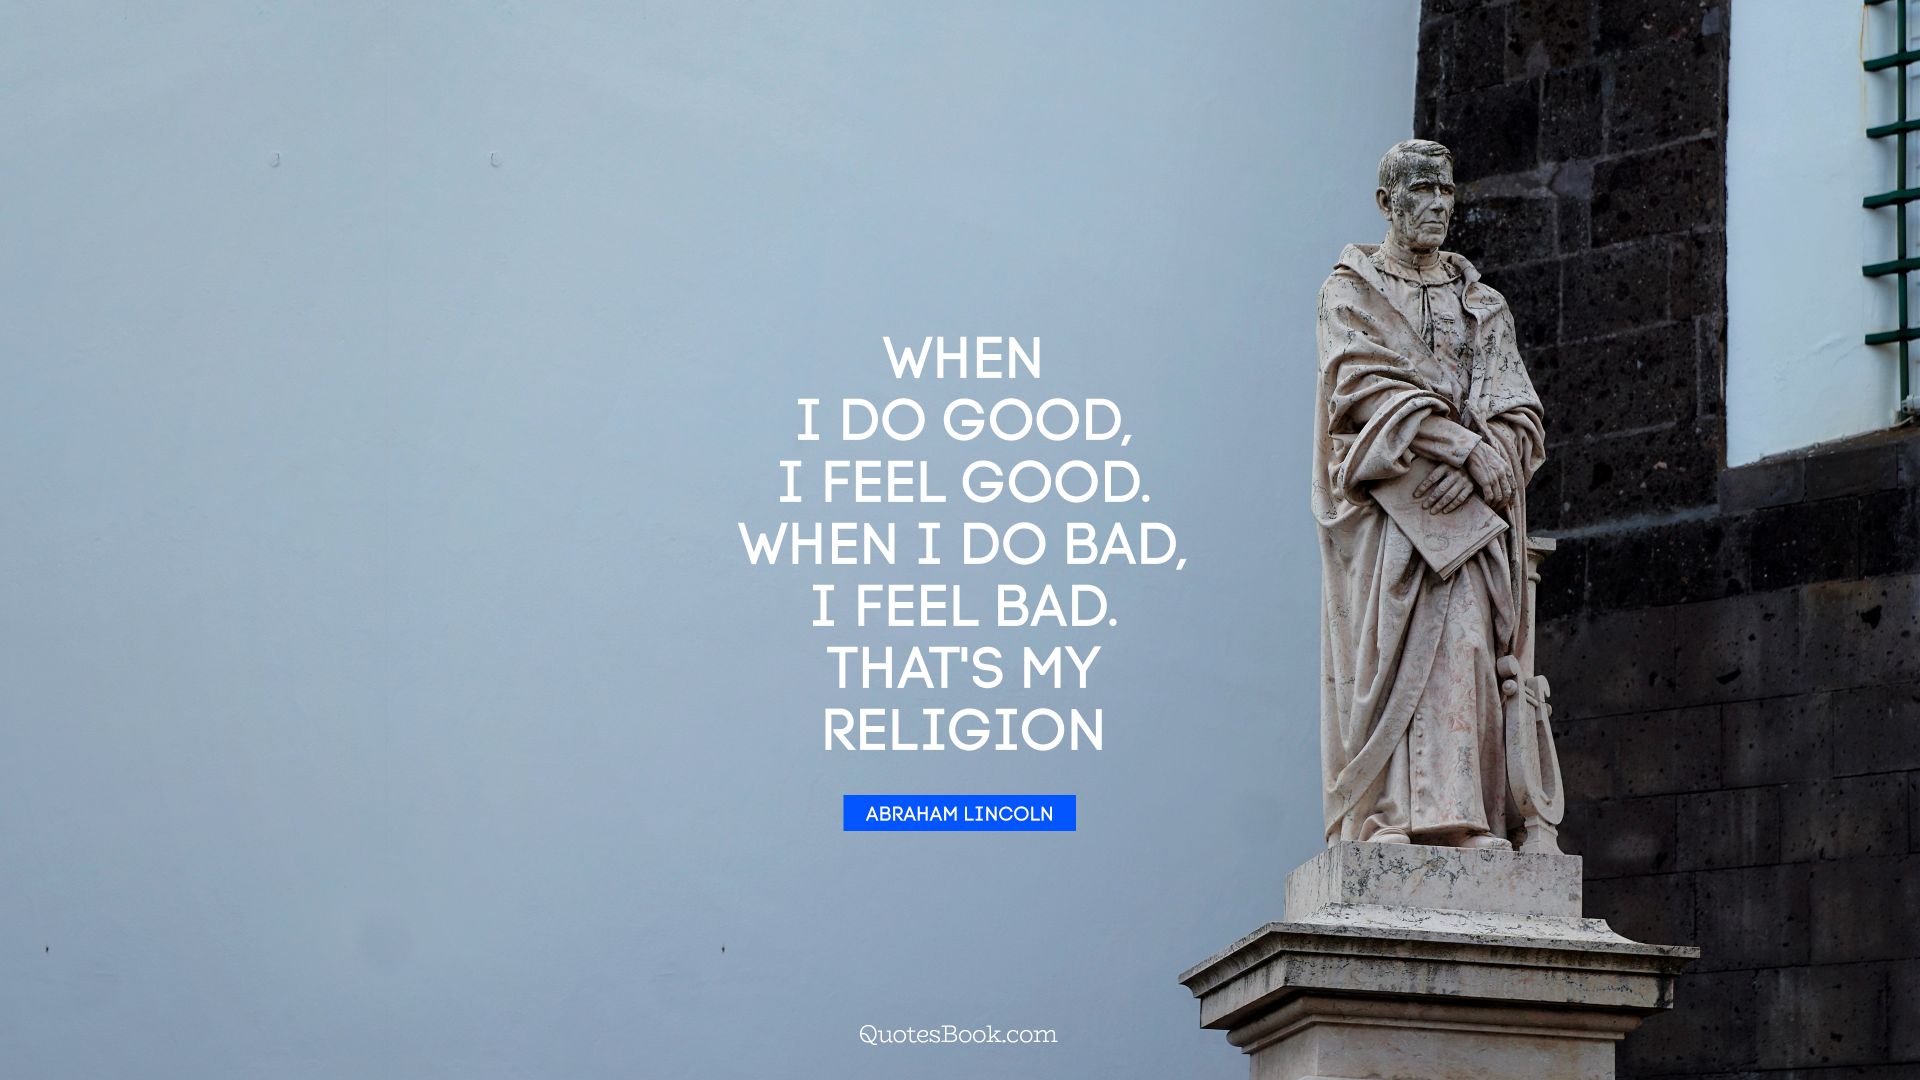 When I do good, I feel good. When I do bad, I feel bad. That's my religion. - Quote by Abraham Lincoln